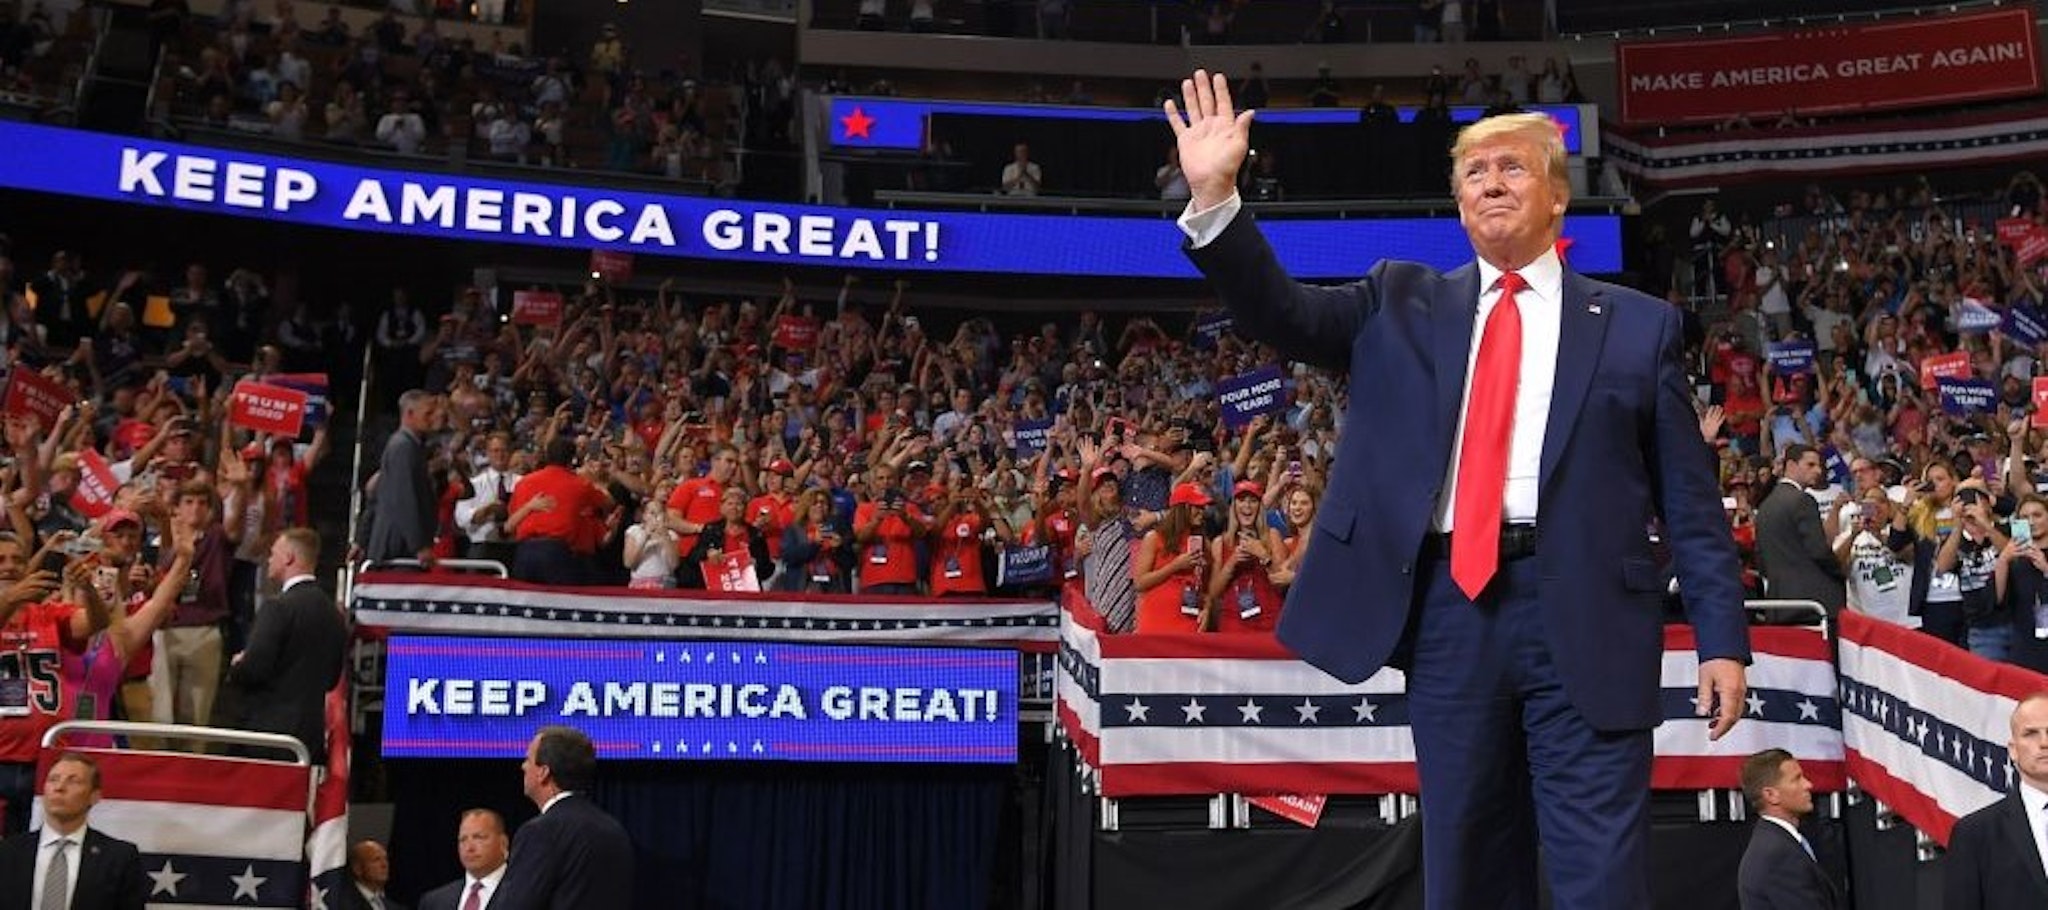 TOPSHOT - US President Donald Trump arrives to speak during a rally at the Amway Center in Orlando, Florida to officially launch his 2020 campaign on June 18, 2019. - Trump kicks off his reelection campaign at what promised to be a rollicking evening rally in Orlando. (Photo by MANDEL NGAN / AFP) (Photo by